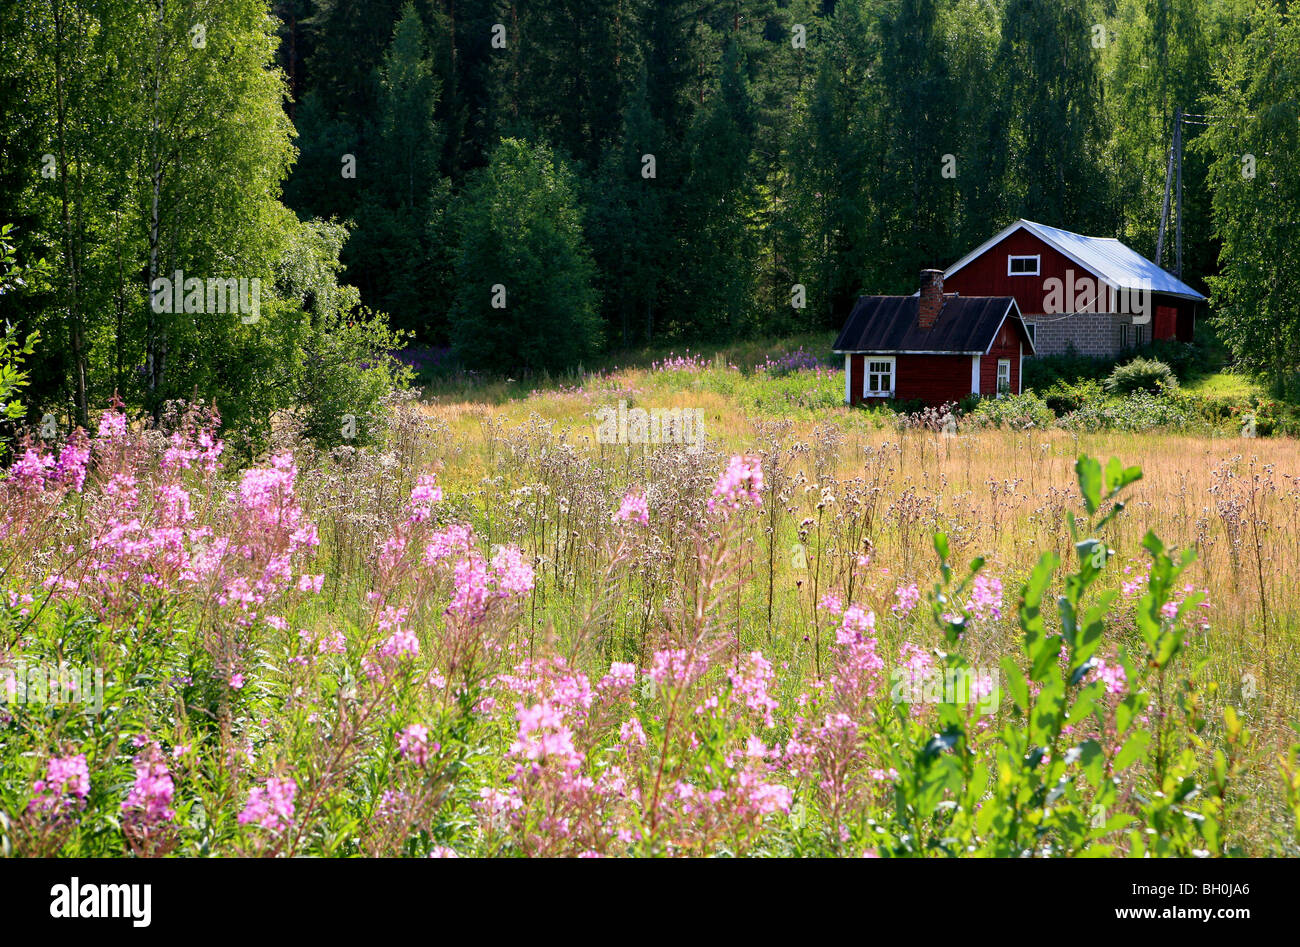 Old finish residential house and meadow flowers in the sunlight, Rantasalmi, Saimaa Lake District, Finland, Europe Stock Photo